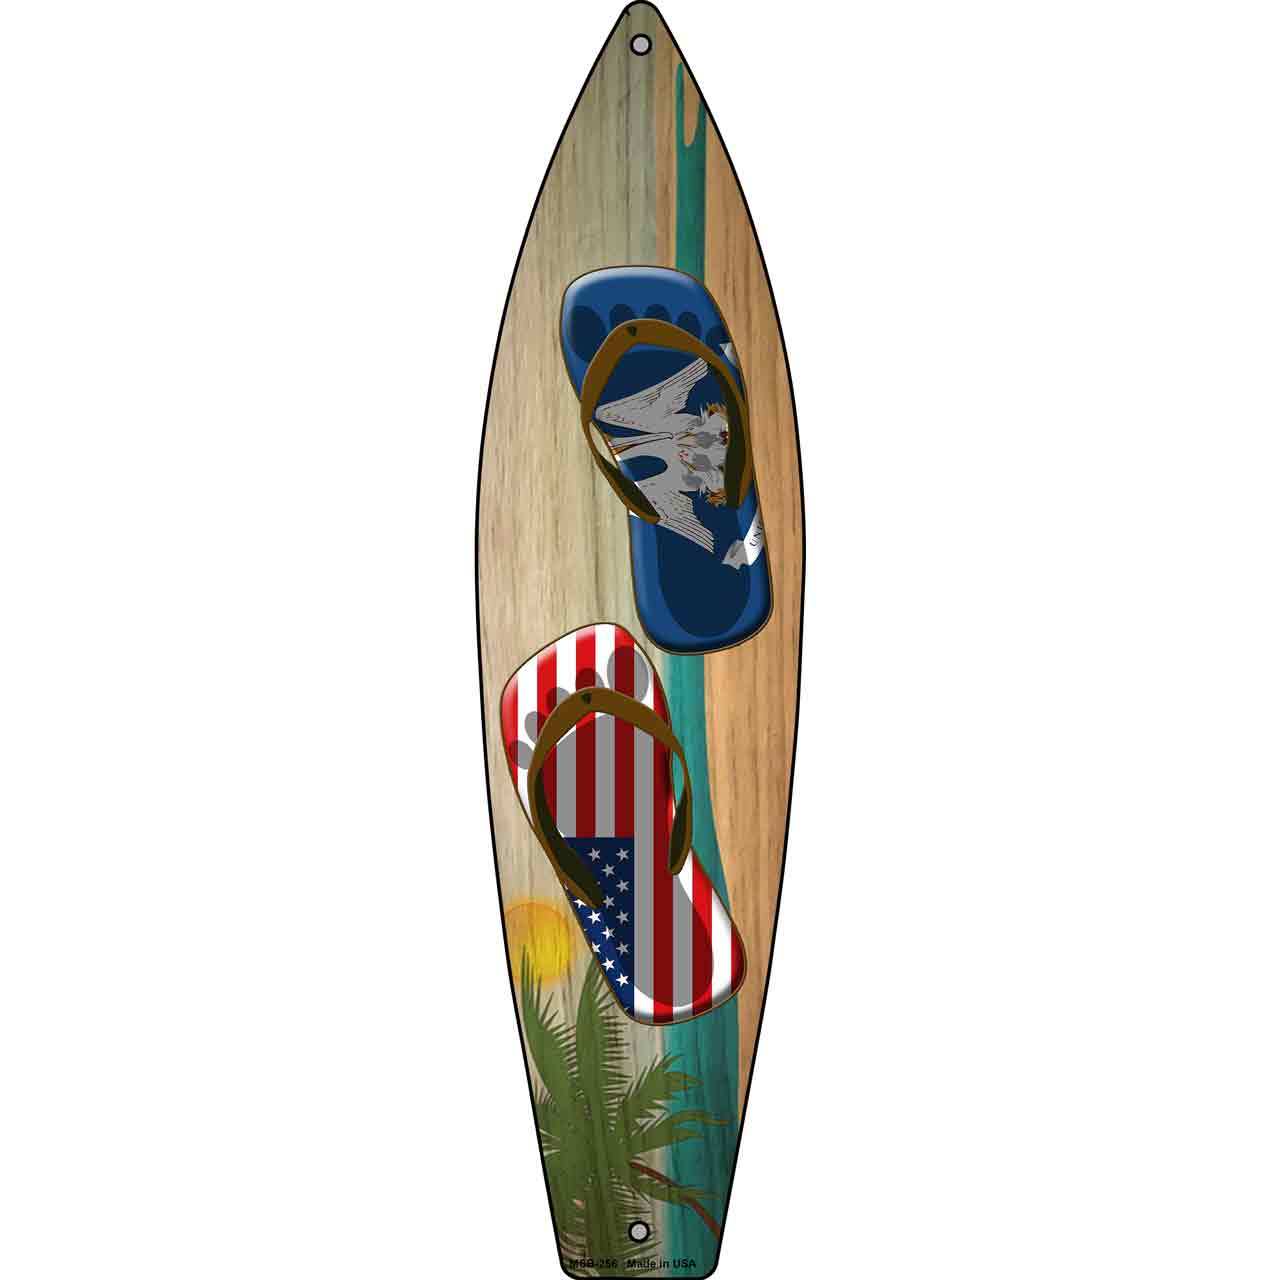 Primary image for Louisiana Flag and US Flag Flip Flop Novelty Mini Metal Surfboard MSB-256